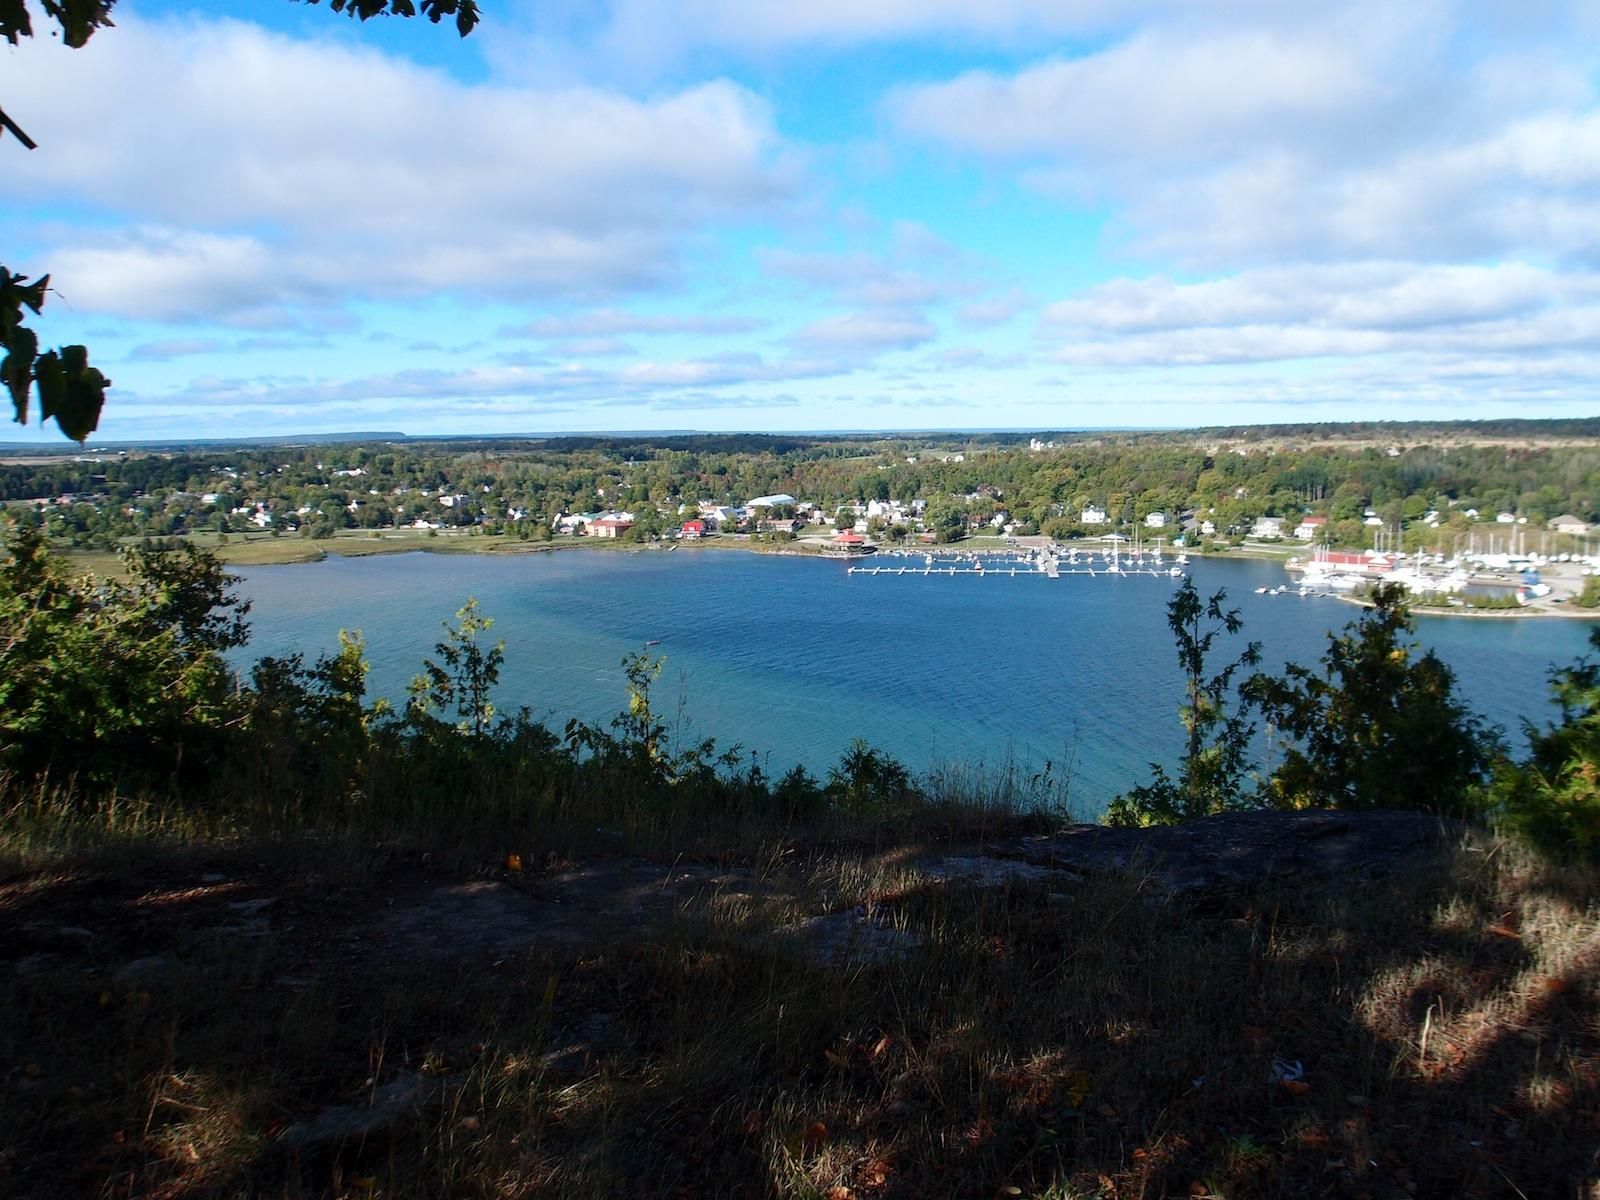 The view of Gore Bay